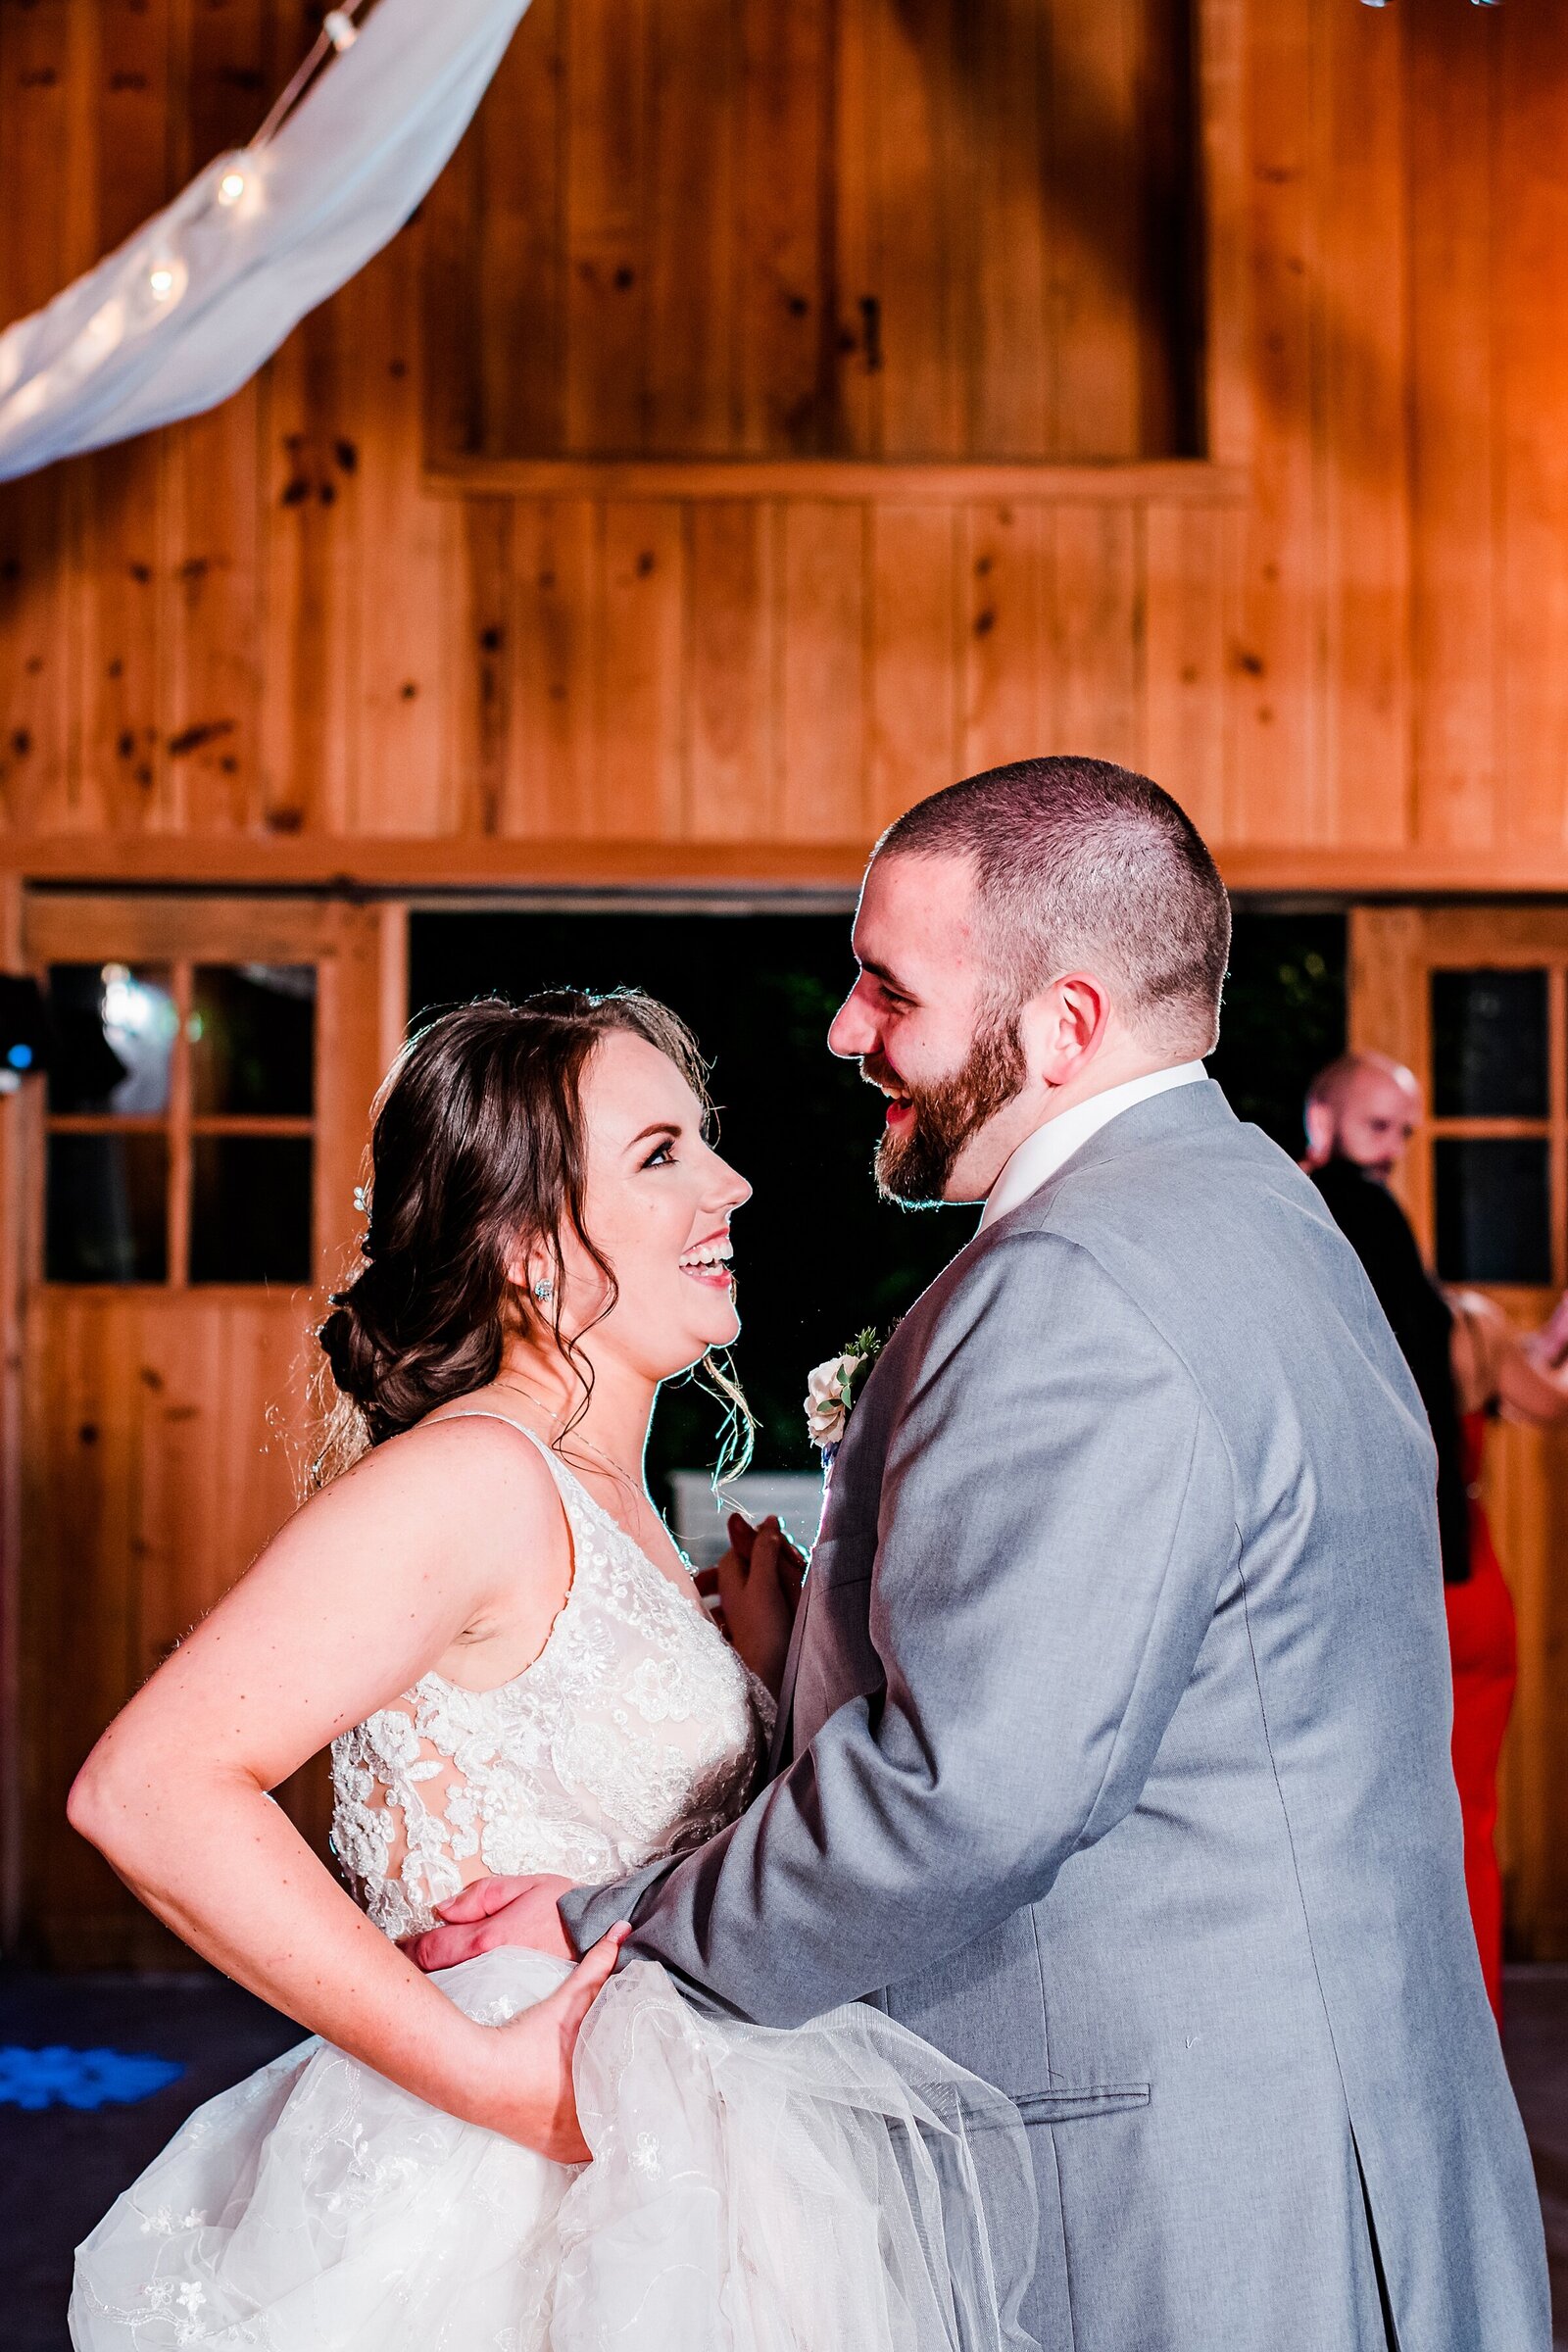 Wedding Reception | The Delamater House Wedding | Chynna Pacheco Photography-1134